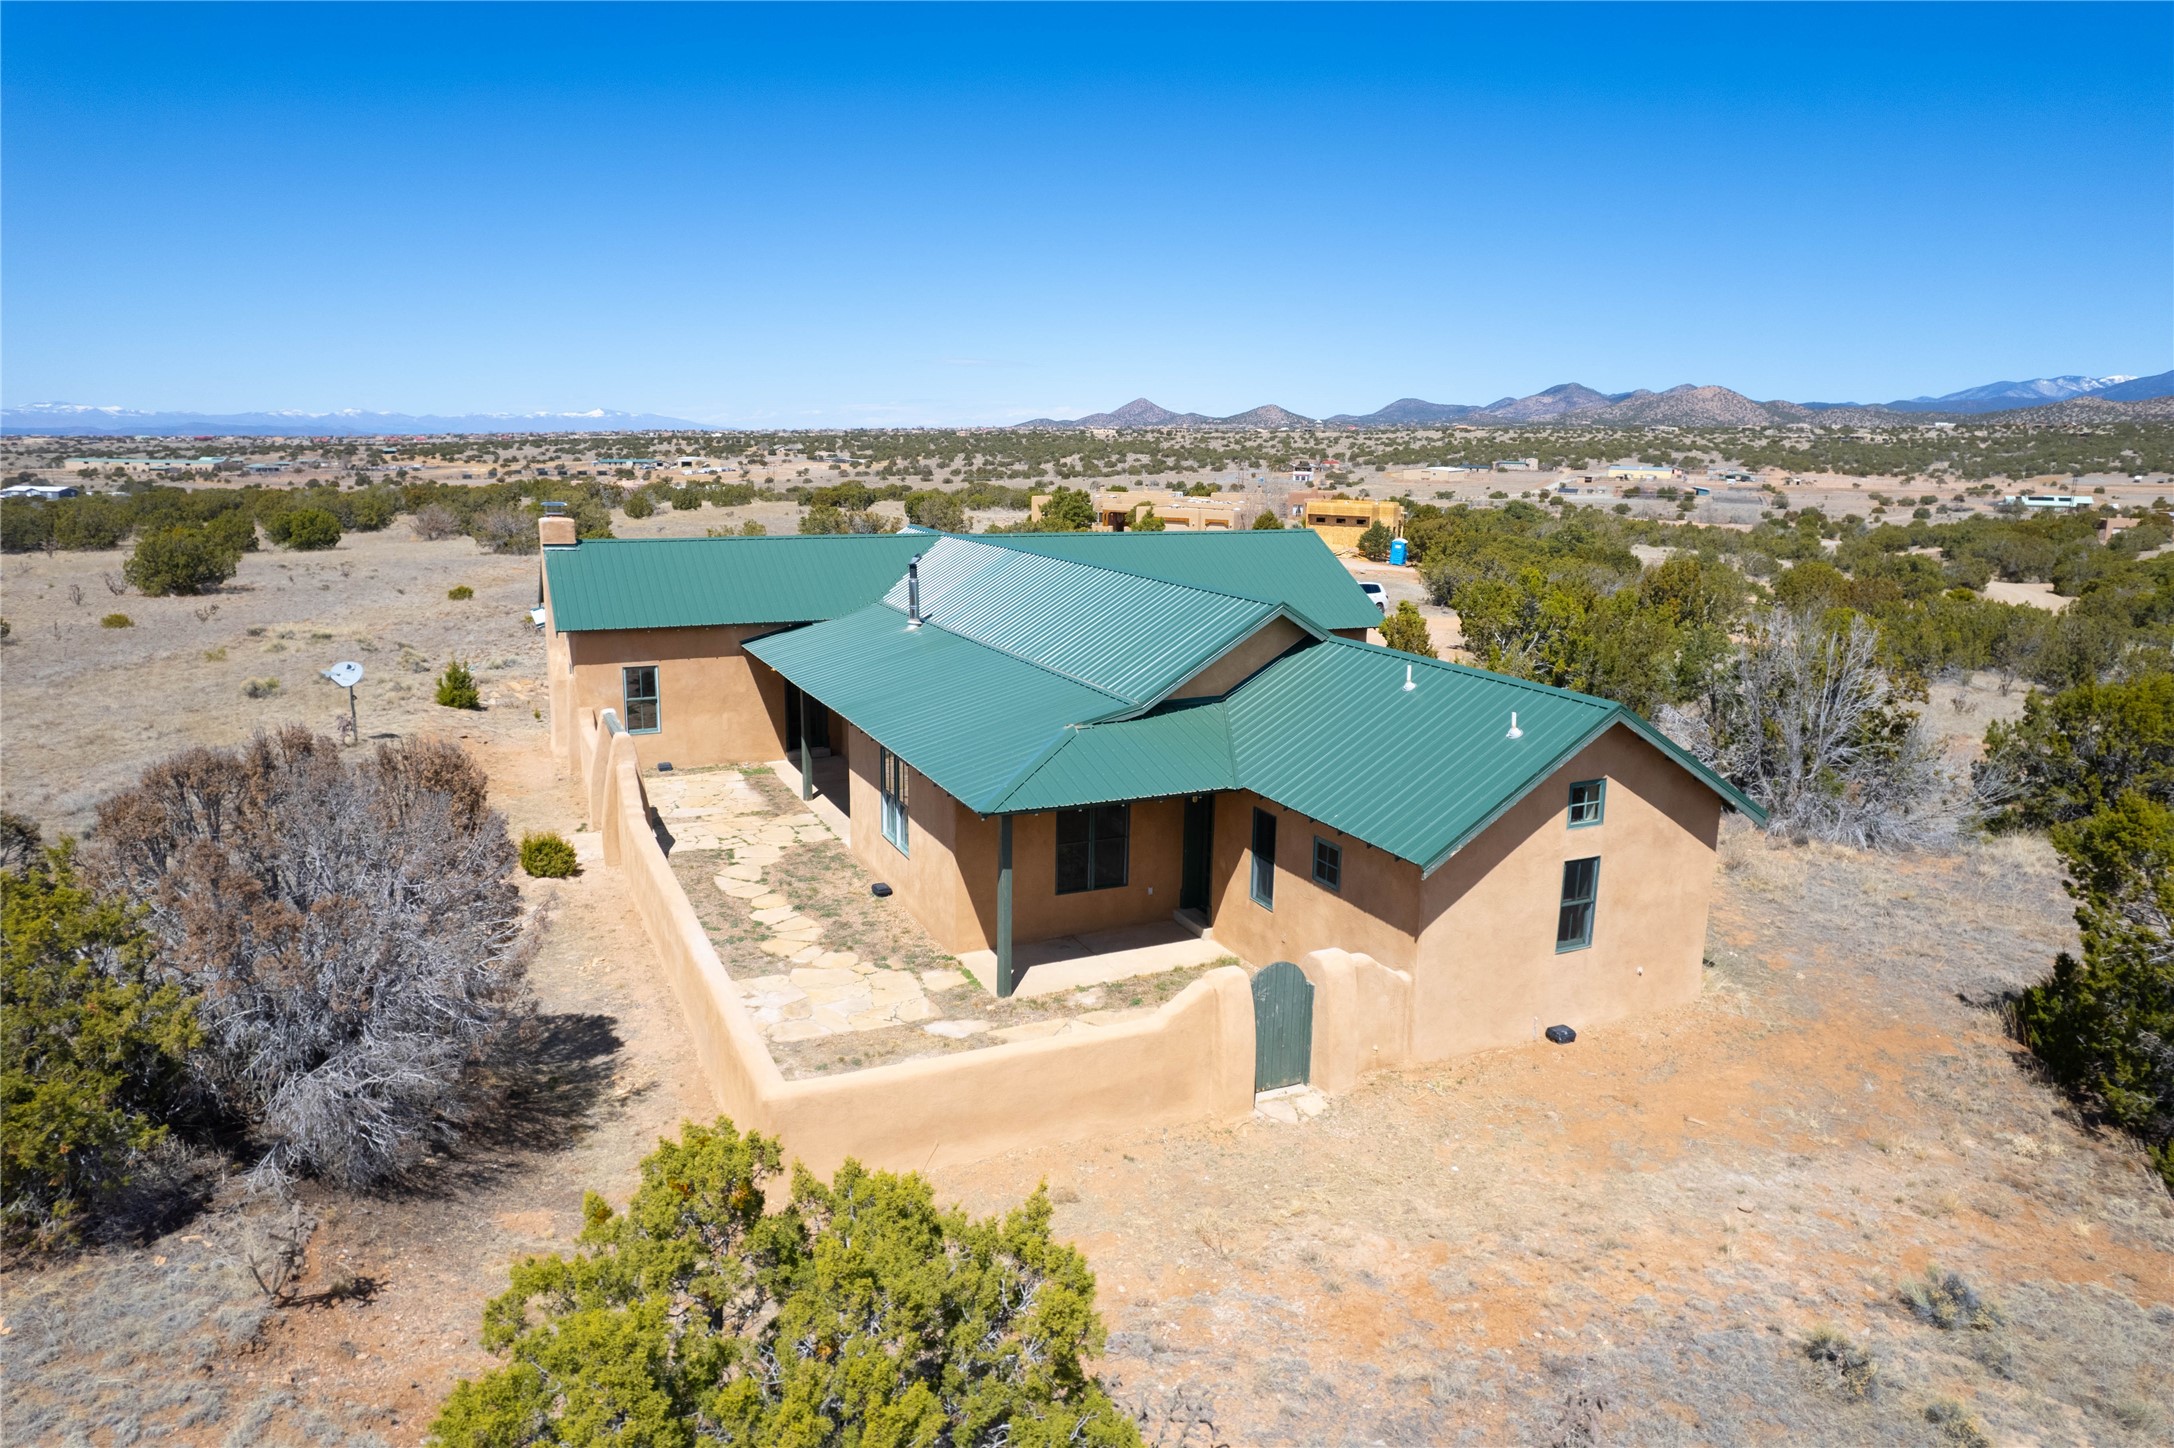 33 Willa Cather Road, Lamy, New Mexico 87508, 2 Bedrooms Bedrooms, ,2 BathroomsBathrooms,Residential,For Sale,33 Willa Cather Road,202341909